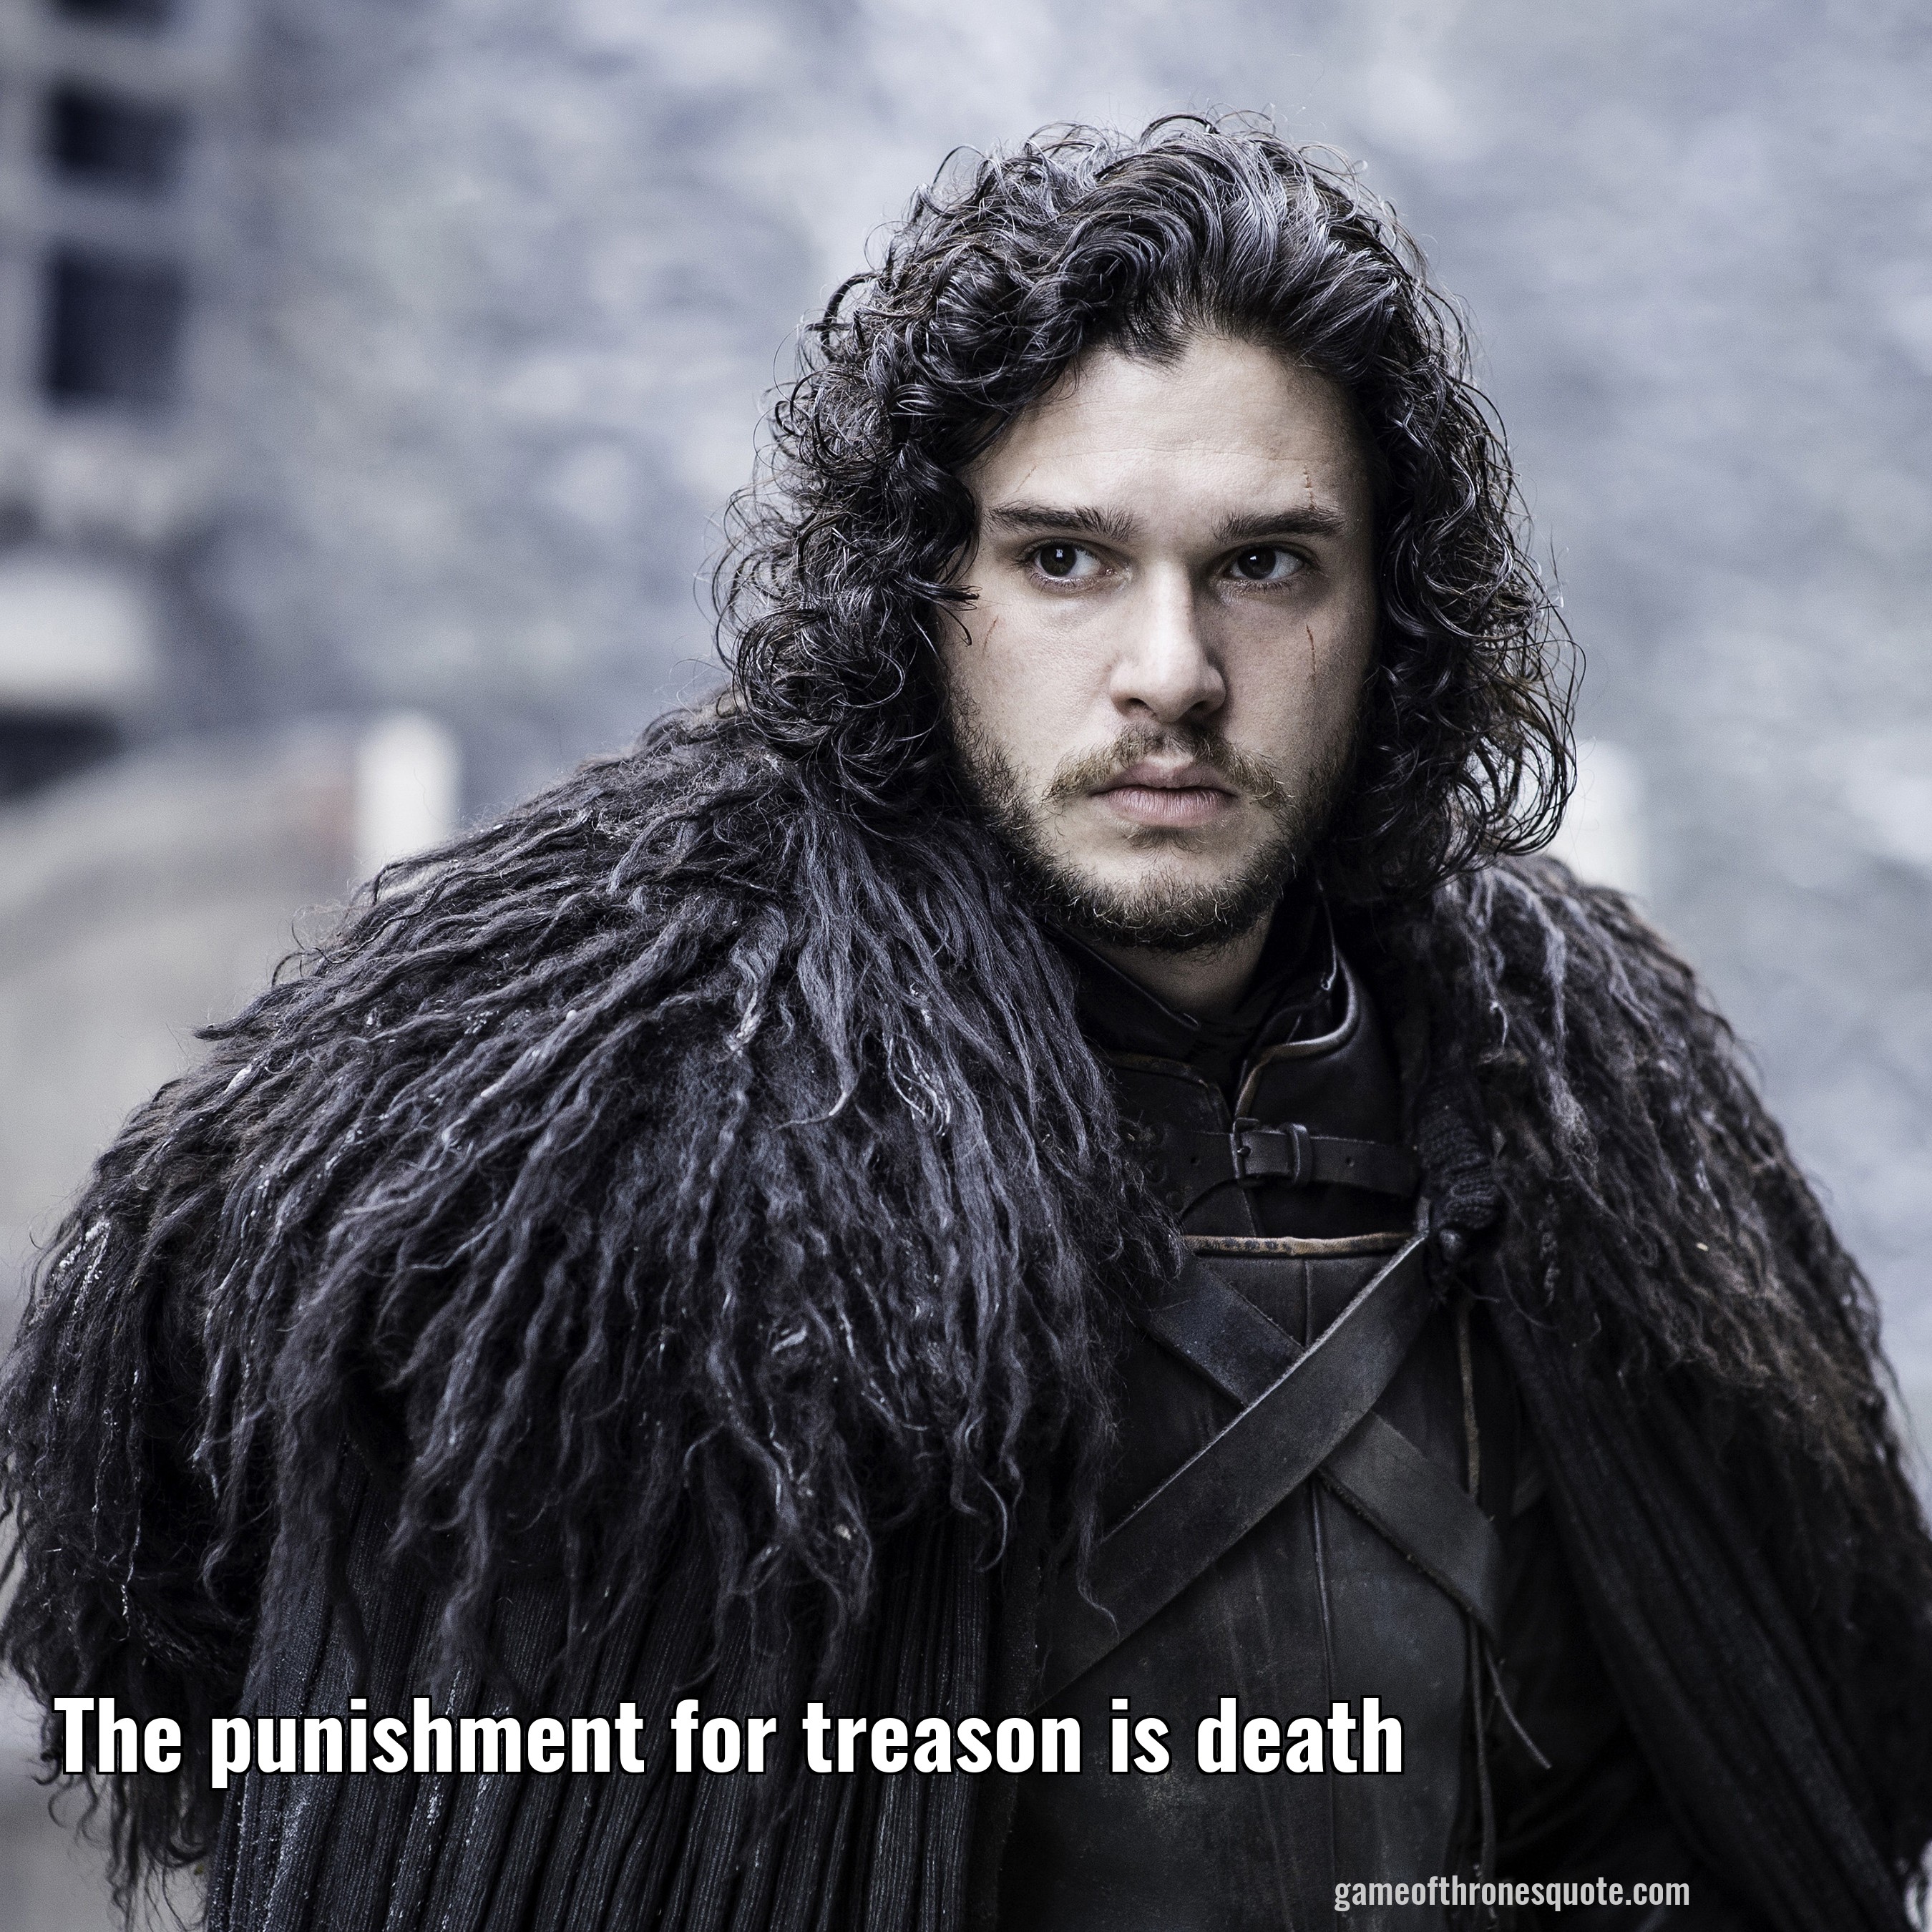 The punishment for treason is death